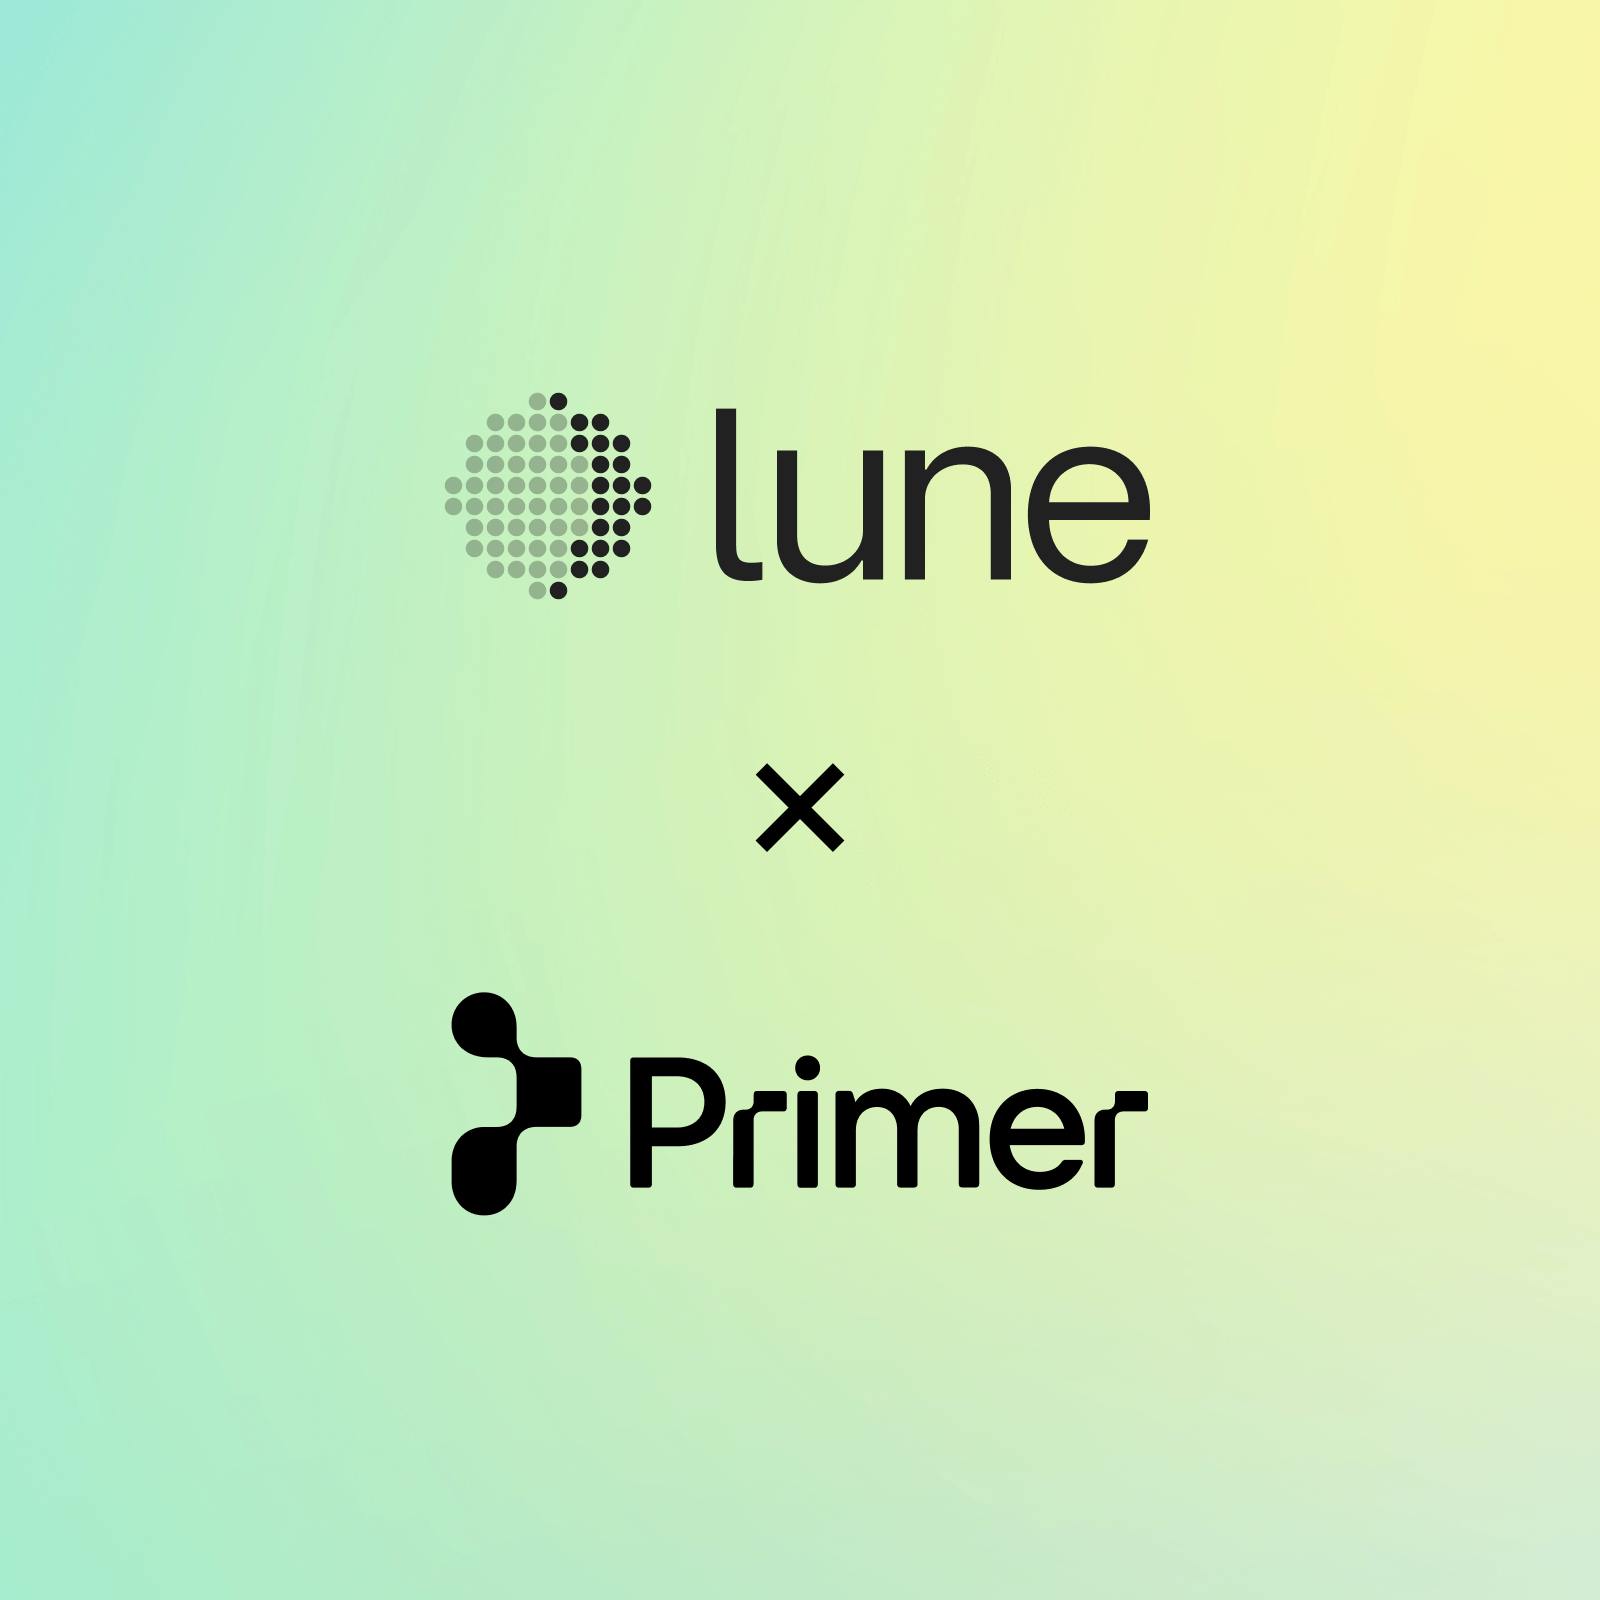 Primer partners with Lune to add climate impact into the payments and commerce flow